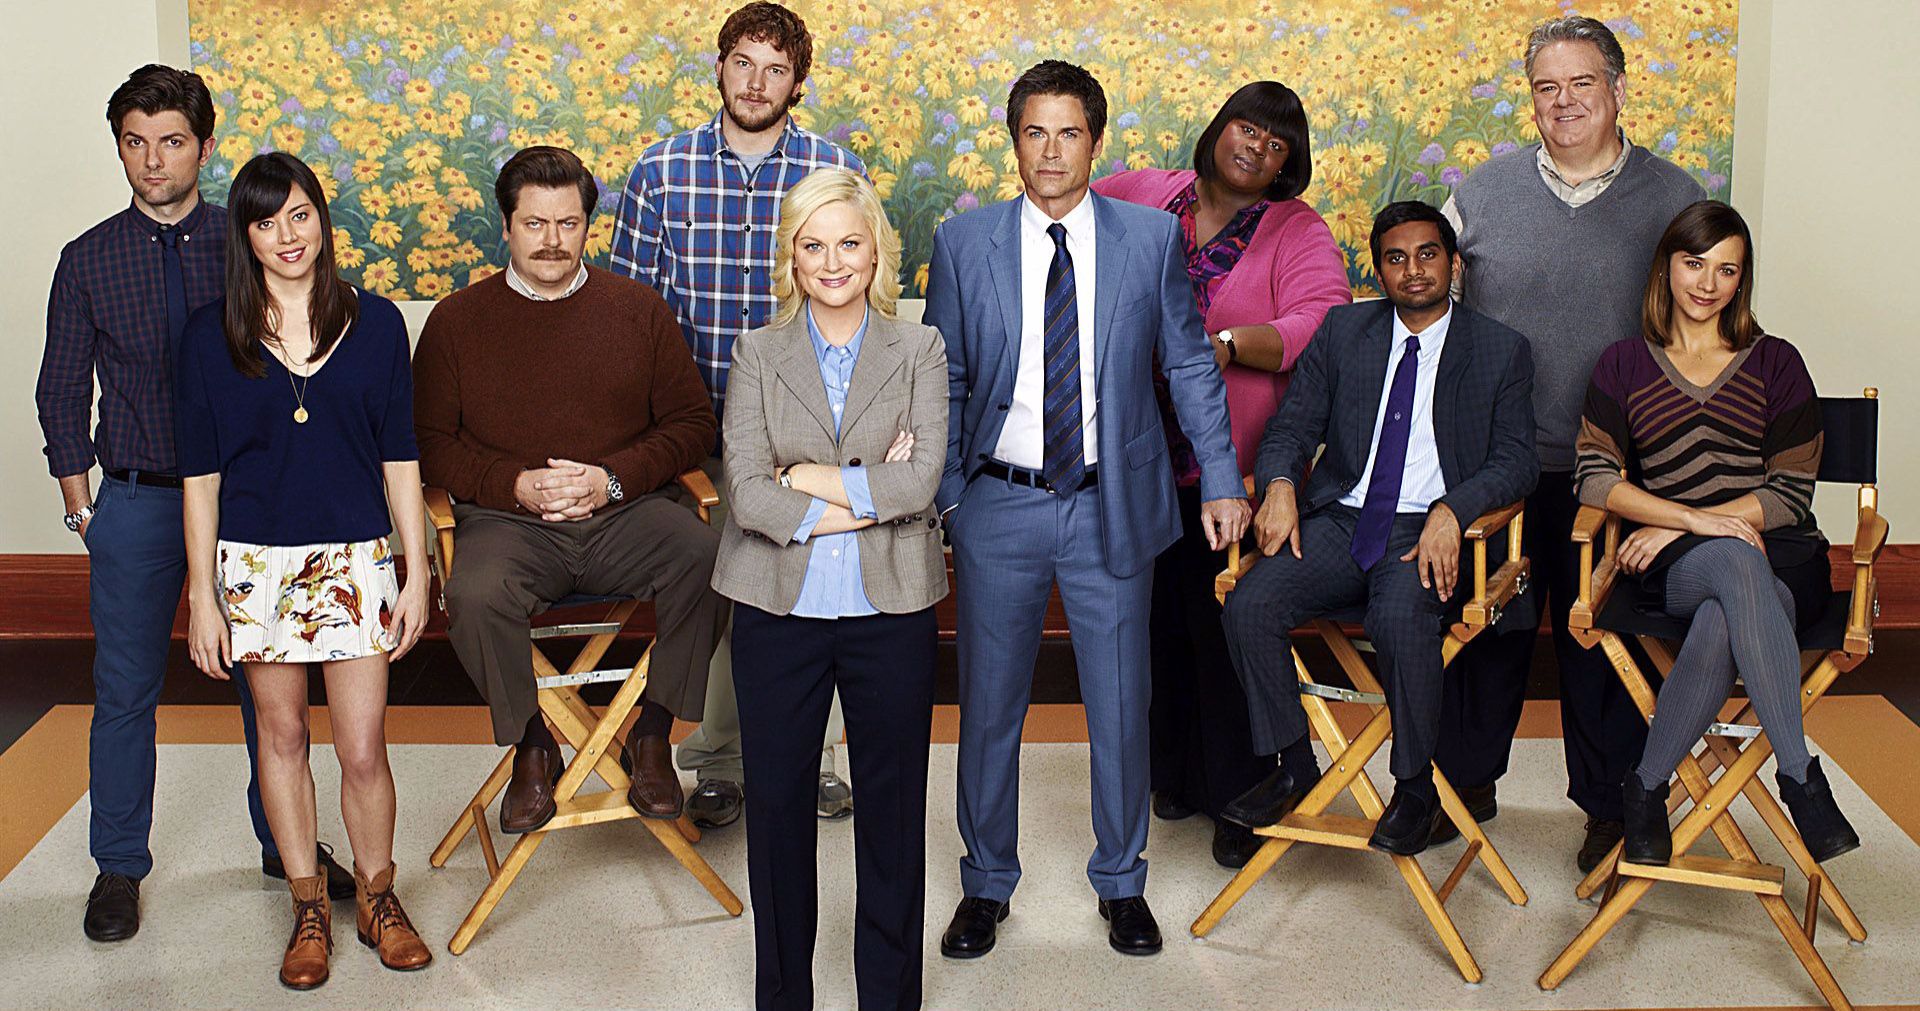 Parks and Recreation Is Leaving Netflix, Hulu and Amazon Prime Next Week